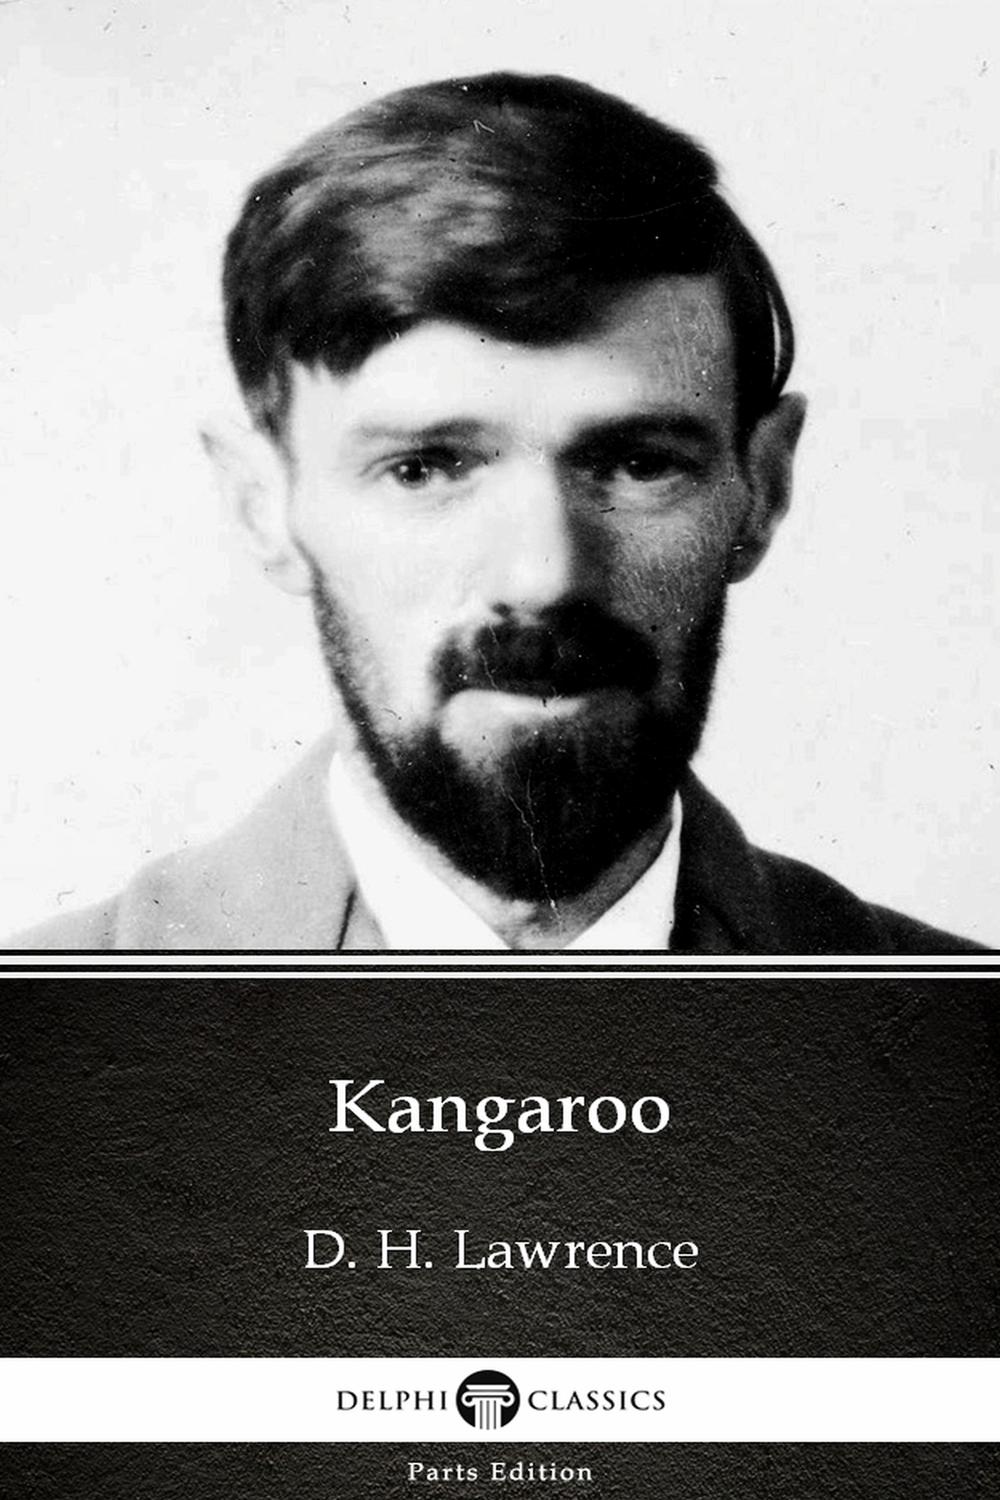 Kangaroo by D. H. Lawrence (Illustrated) - D. H. Lawrence, Delphi Classics